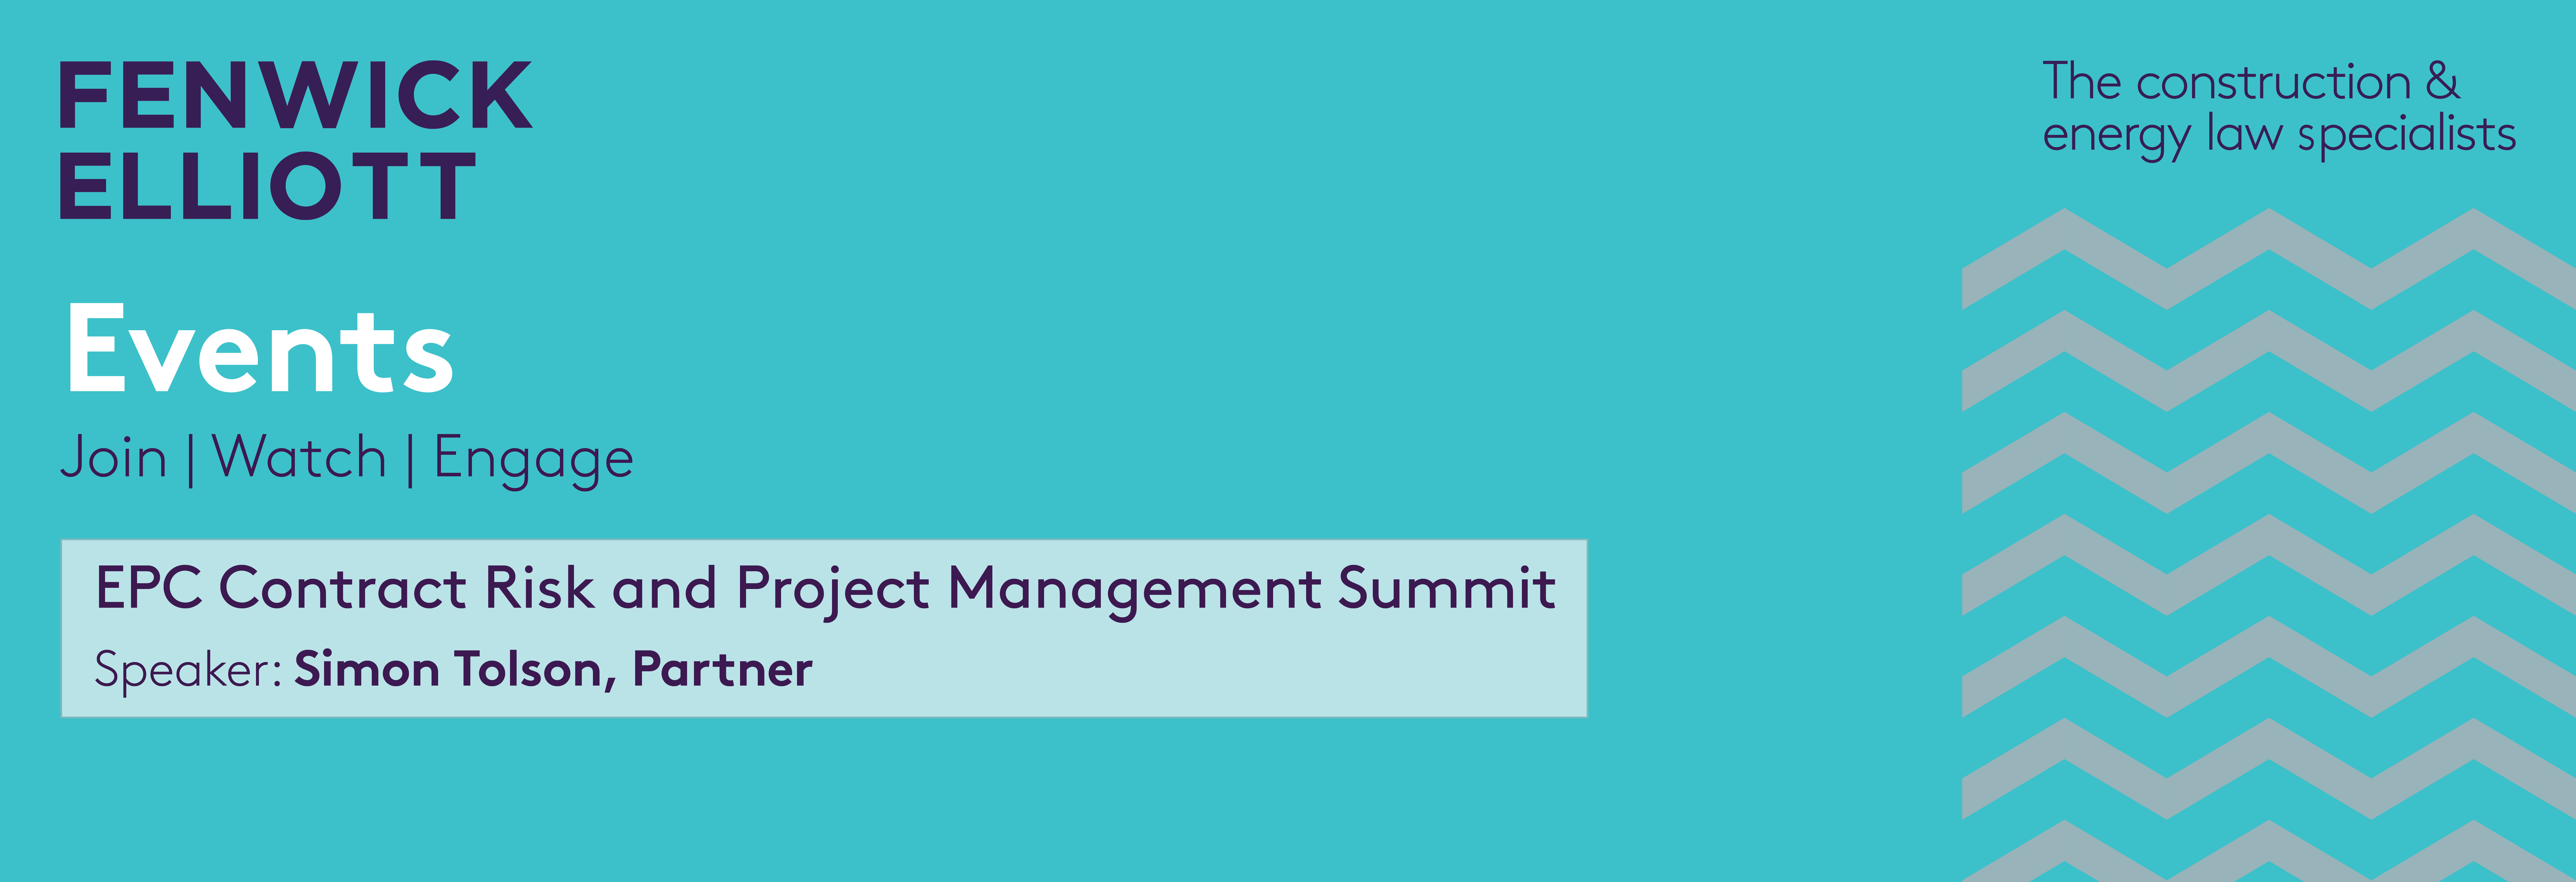 Banner for the 6th annual EPC Contract Risk & Project Management Summit